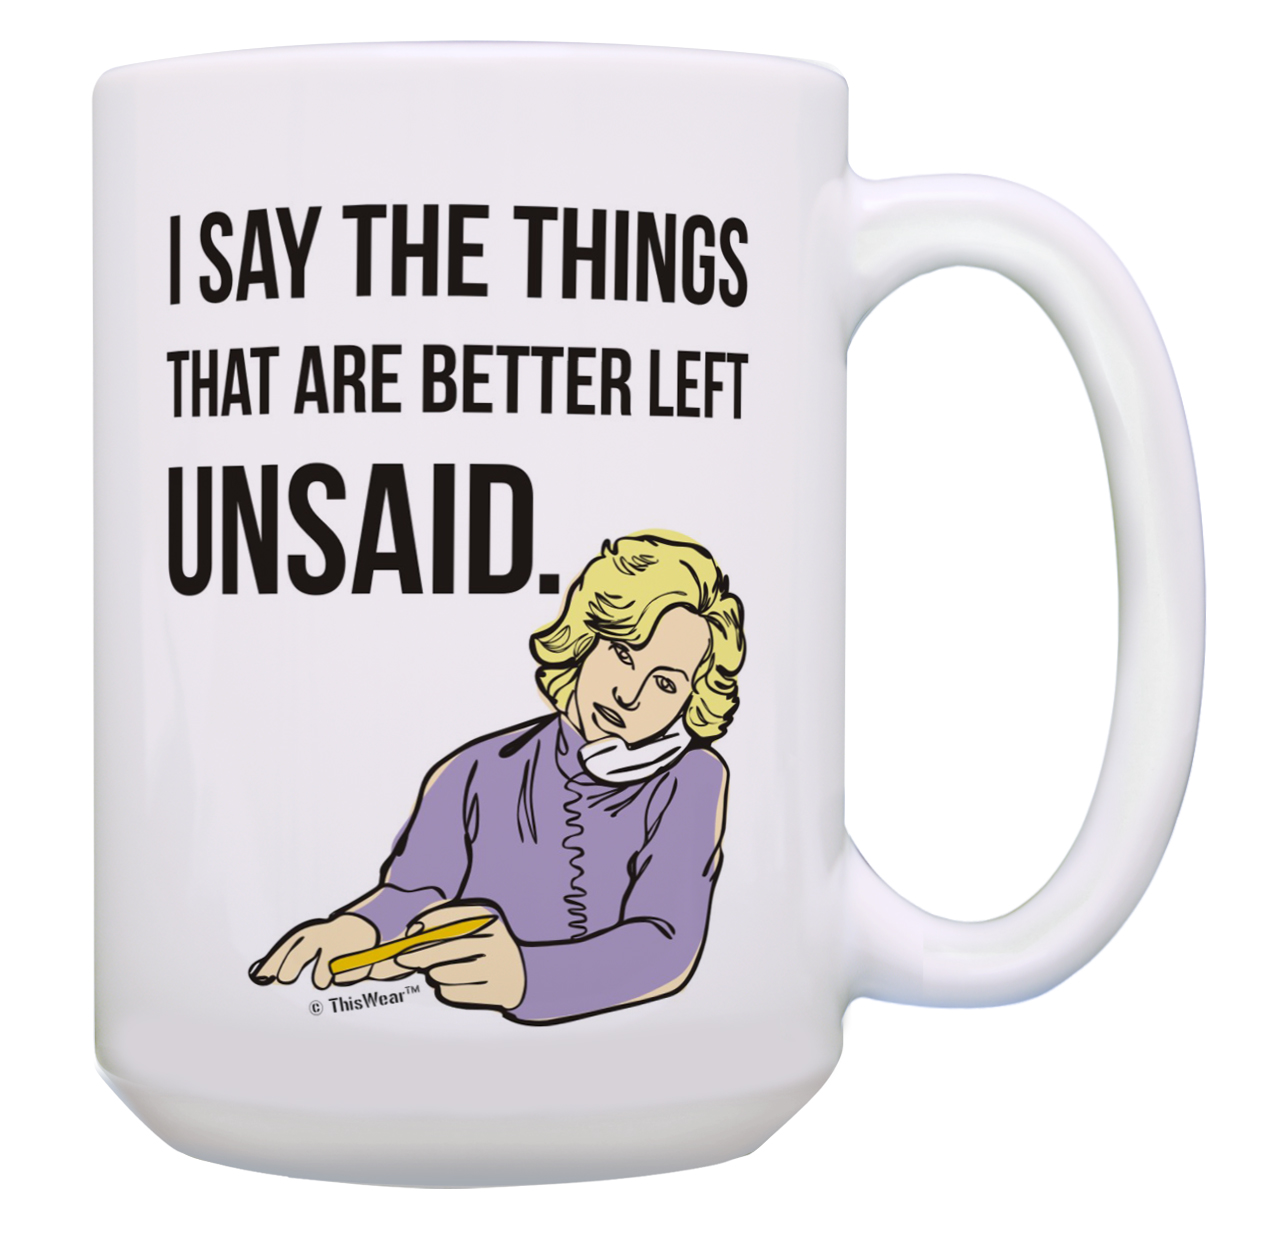 ThisWear Humor Coffee Mug I Say the Things That Are Better Left Unsaid Funny Coffee Mugs Sarcasm Cup Funny Coffee Cups for Women and Men Gift 15oz Coffee Mug - image 1 of 4